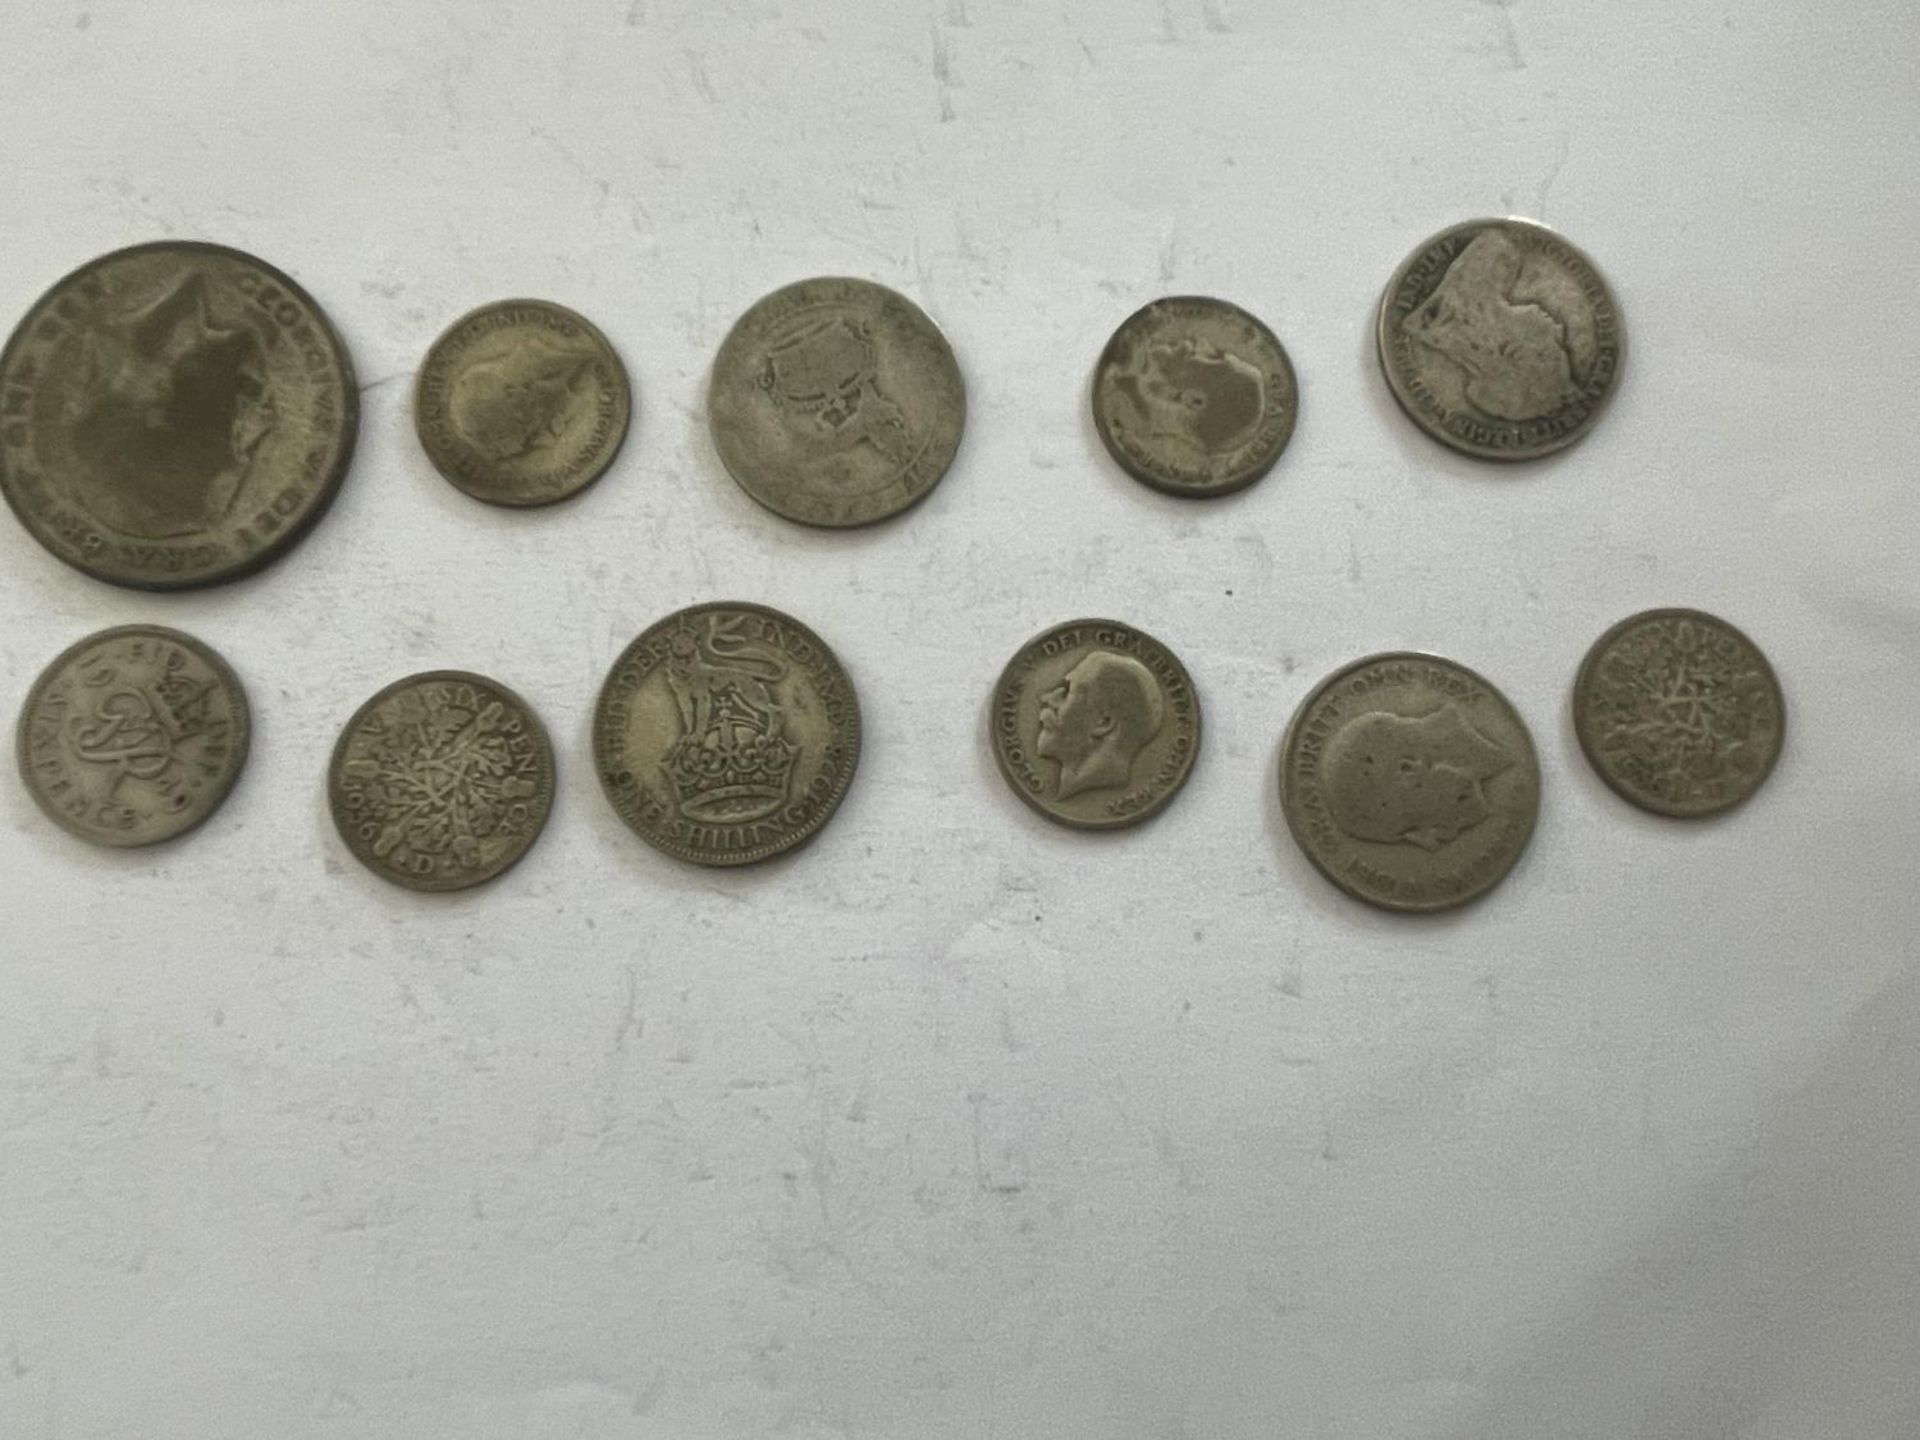 A 1922 HALF CROWN, FOUR PRE 1947 SHILLINGS AND SIX PRE 1947 SIXPENCES - Image 4 of 4